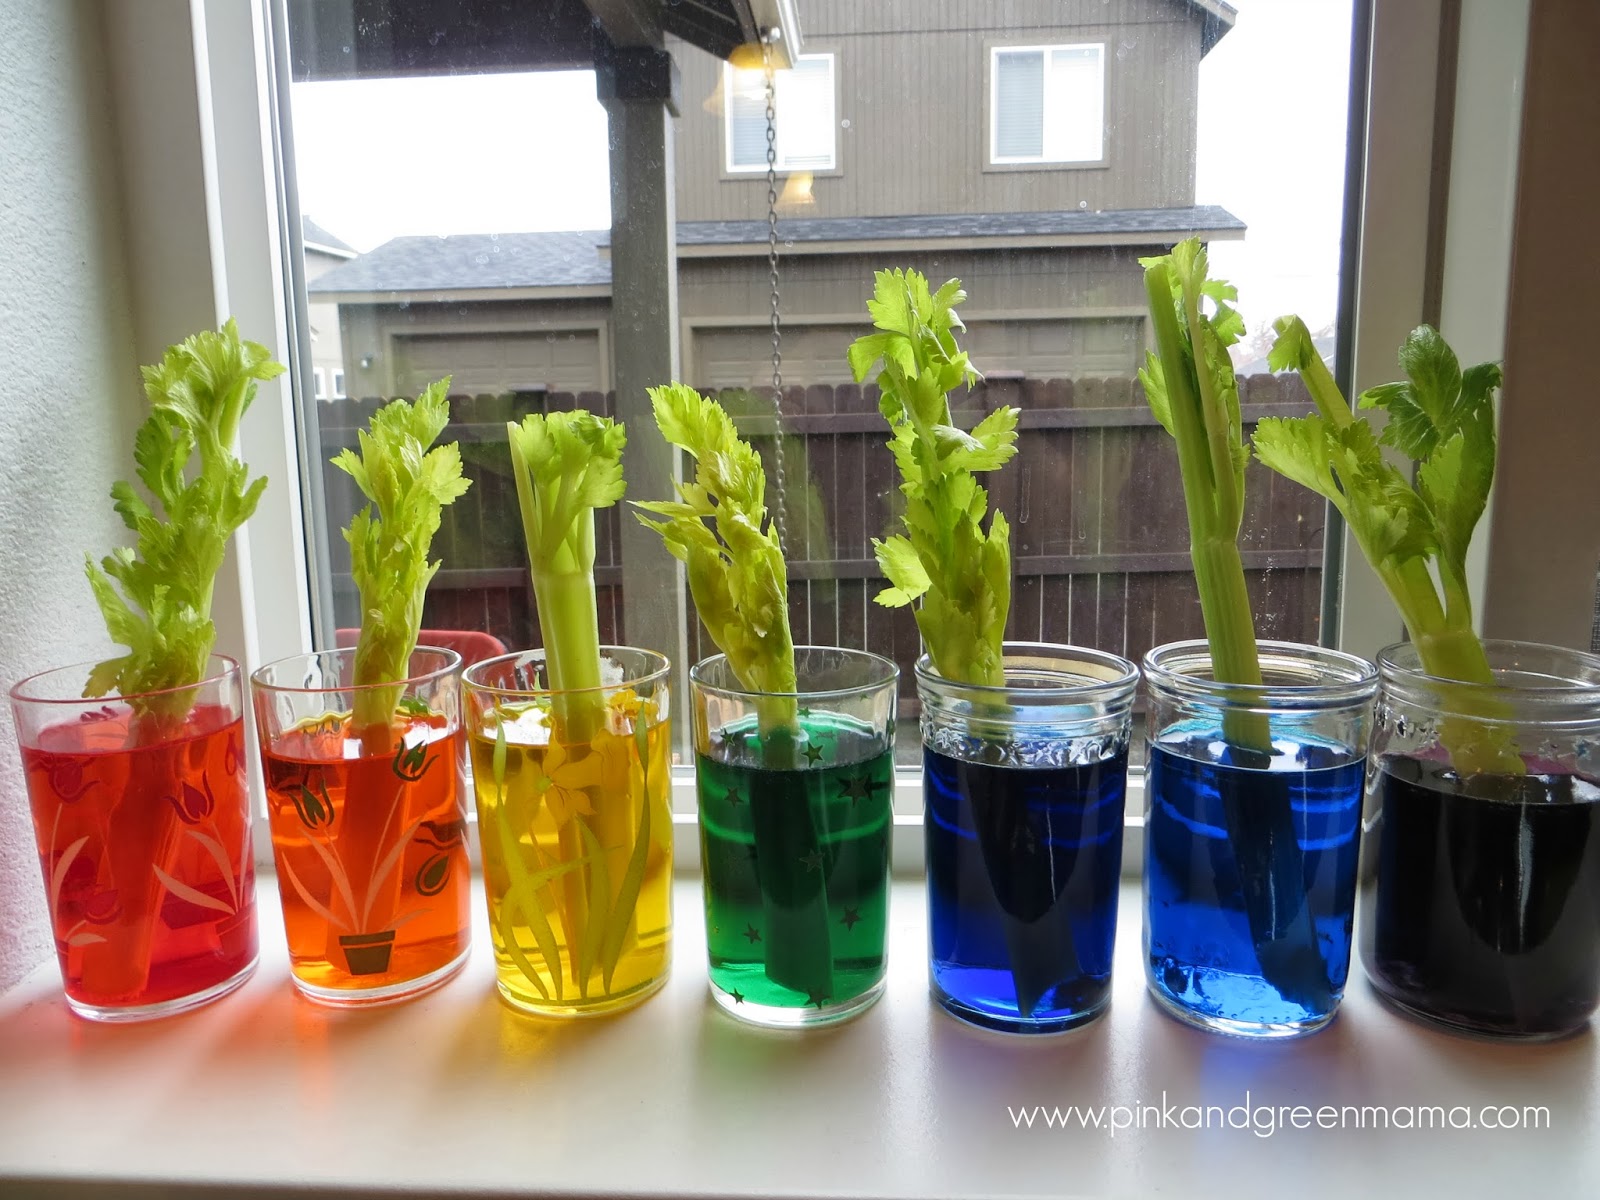 Pink and Green Mama: Kitchen Counter Science with Kids: Rainbow Celery